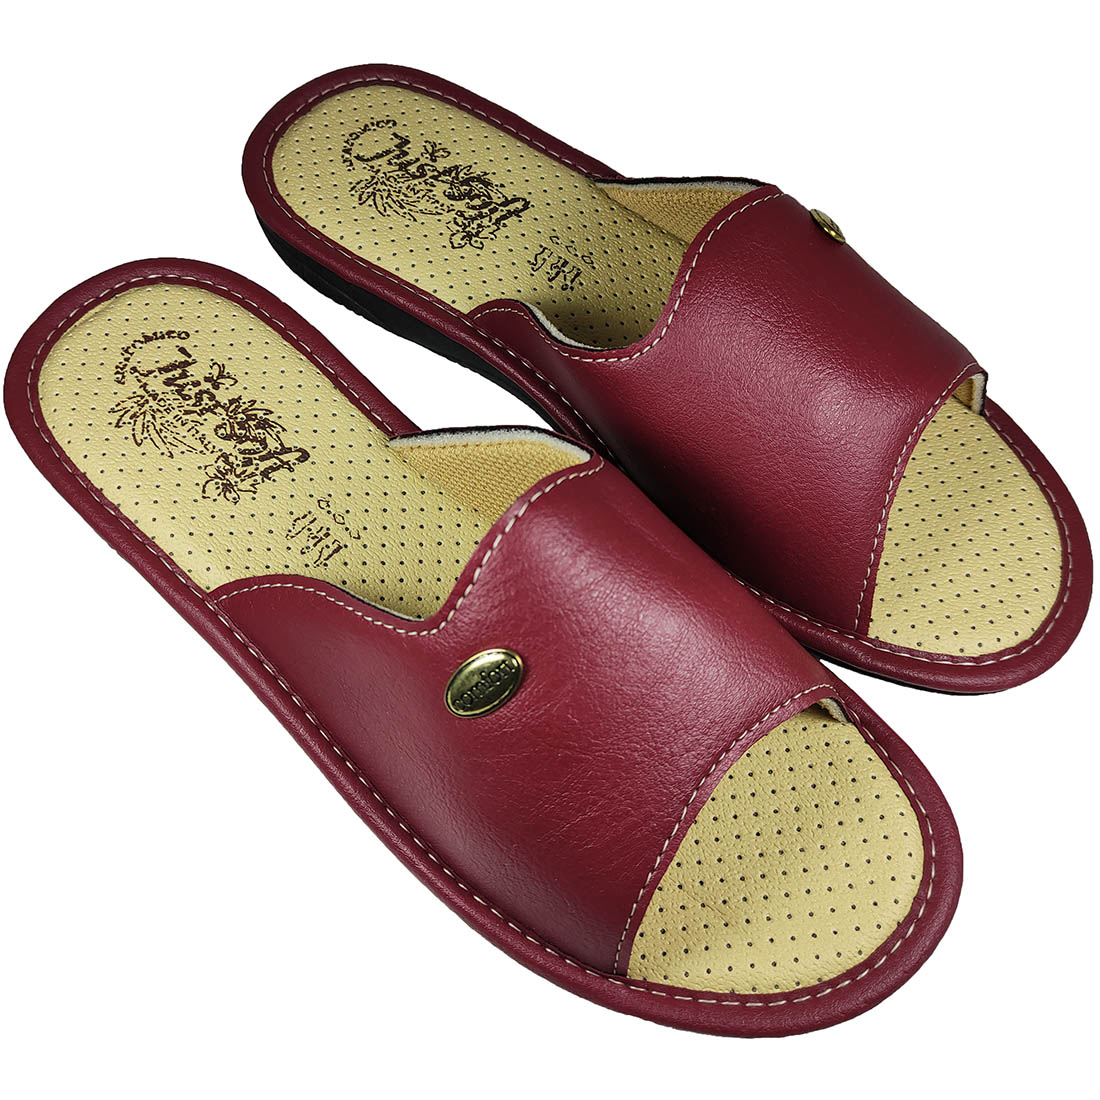 Italian Anatomical slippers Just Soft 1610 Bordeaux